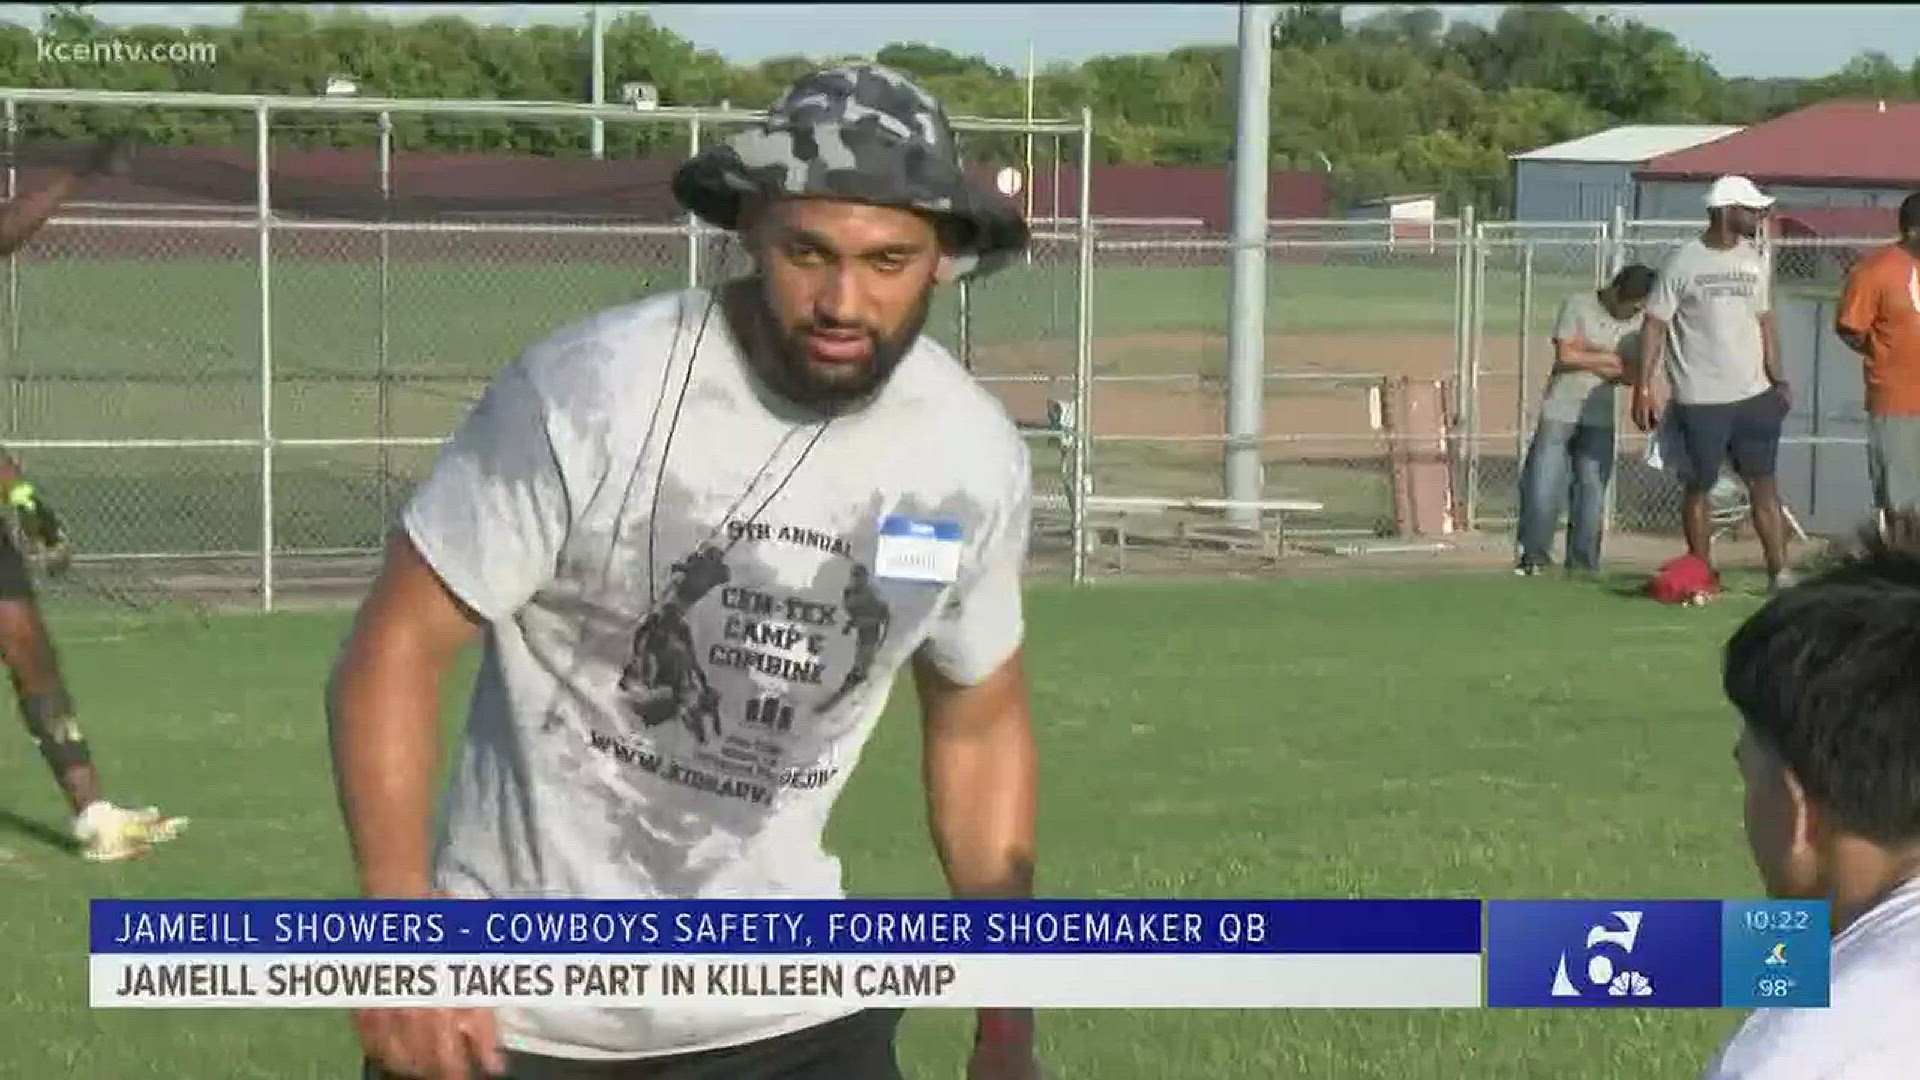 The Shoemaker grad mentioned it while teaching DB's at a camp in Killeen.